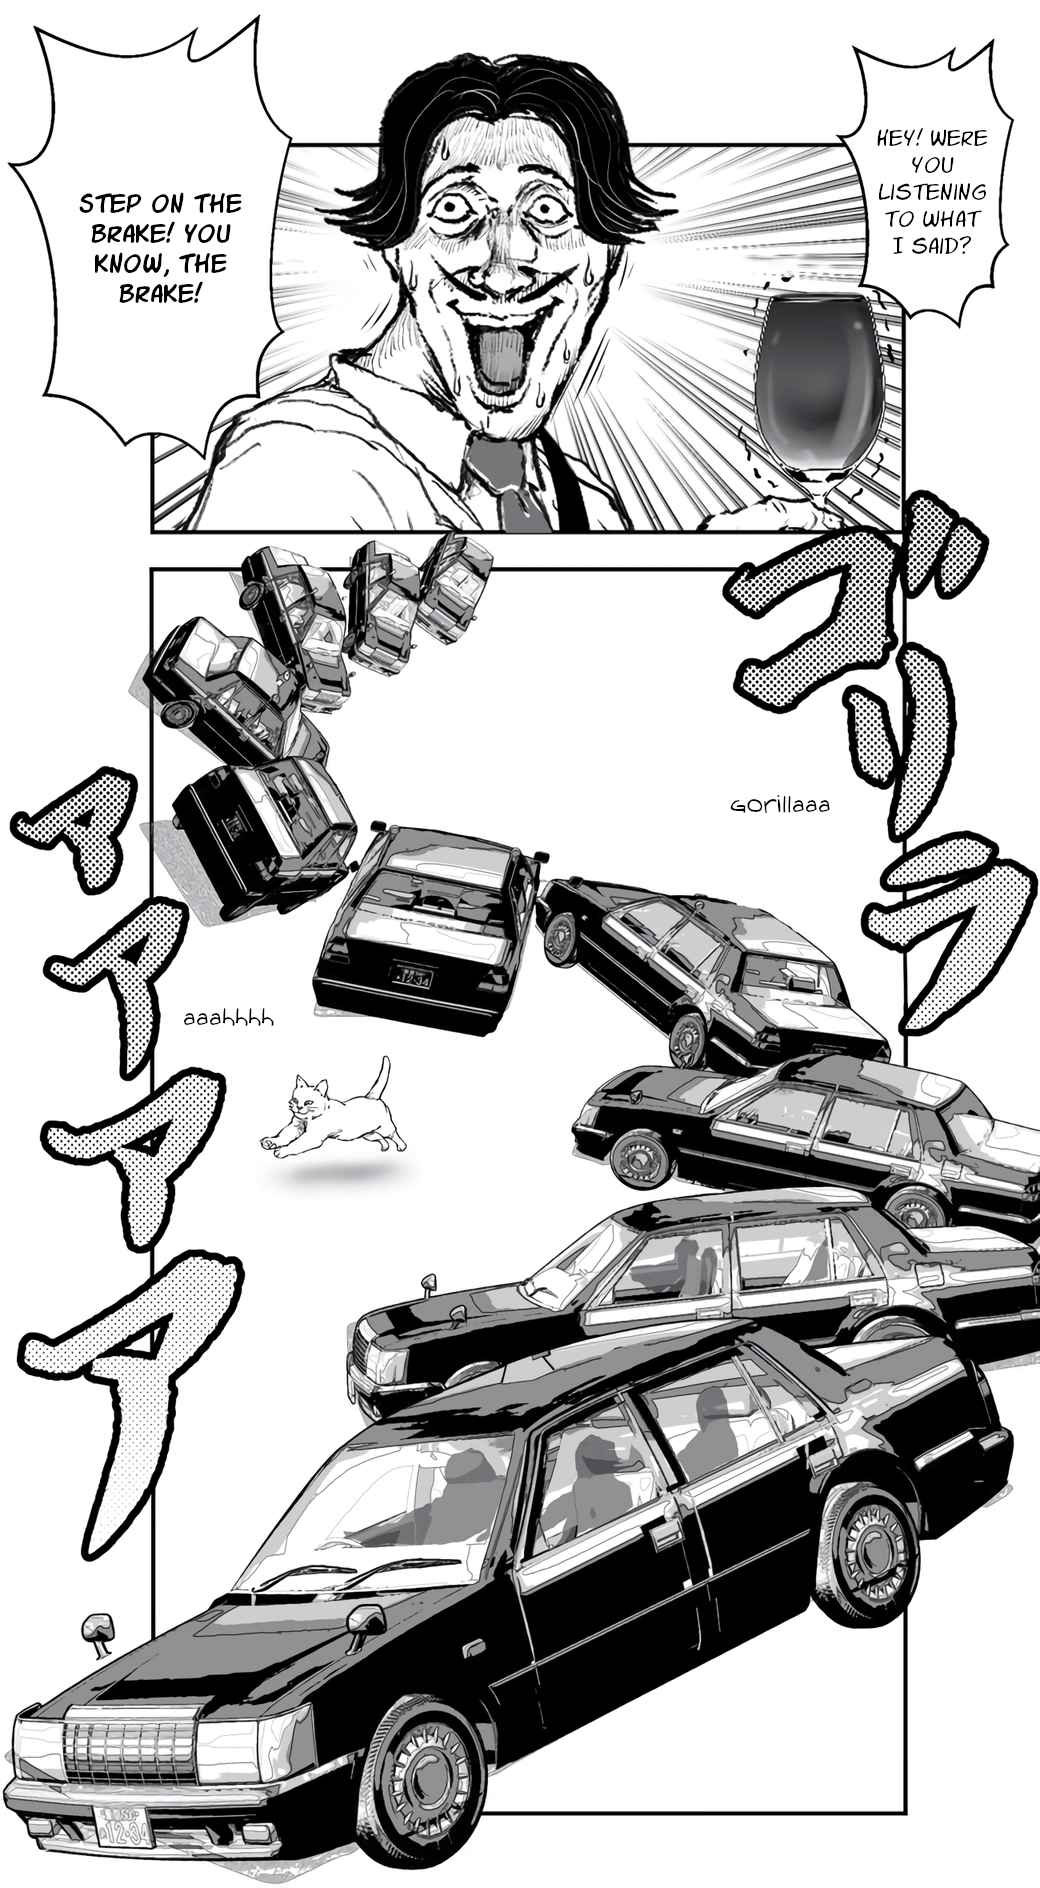 An Extremely Attractive Gorilla Ch. 3 Driving Test